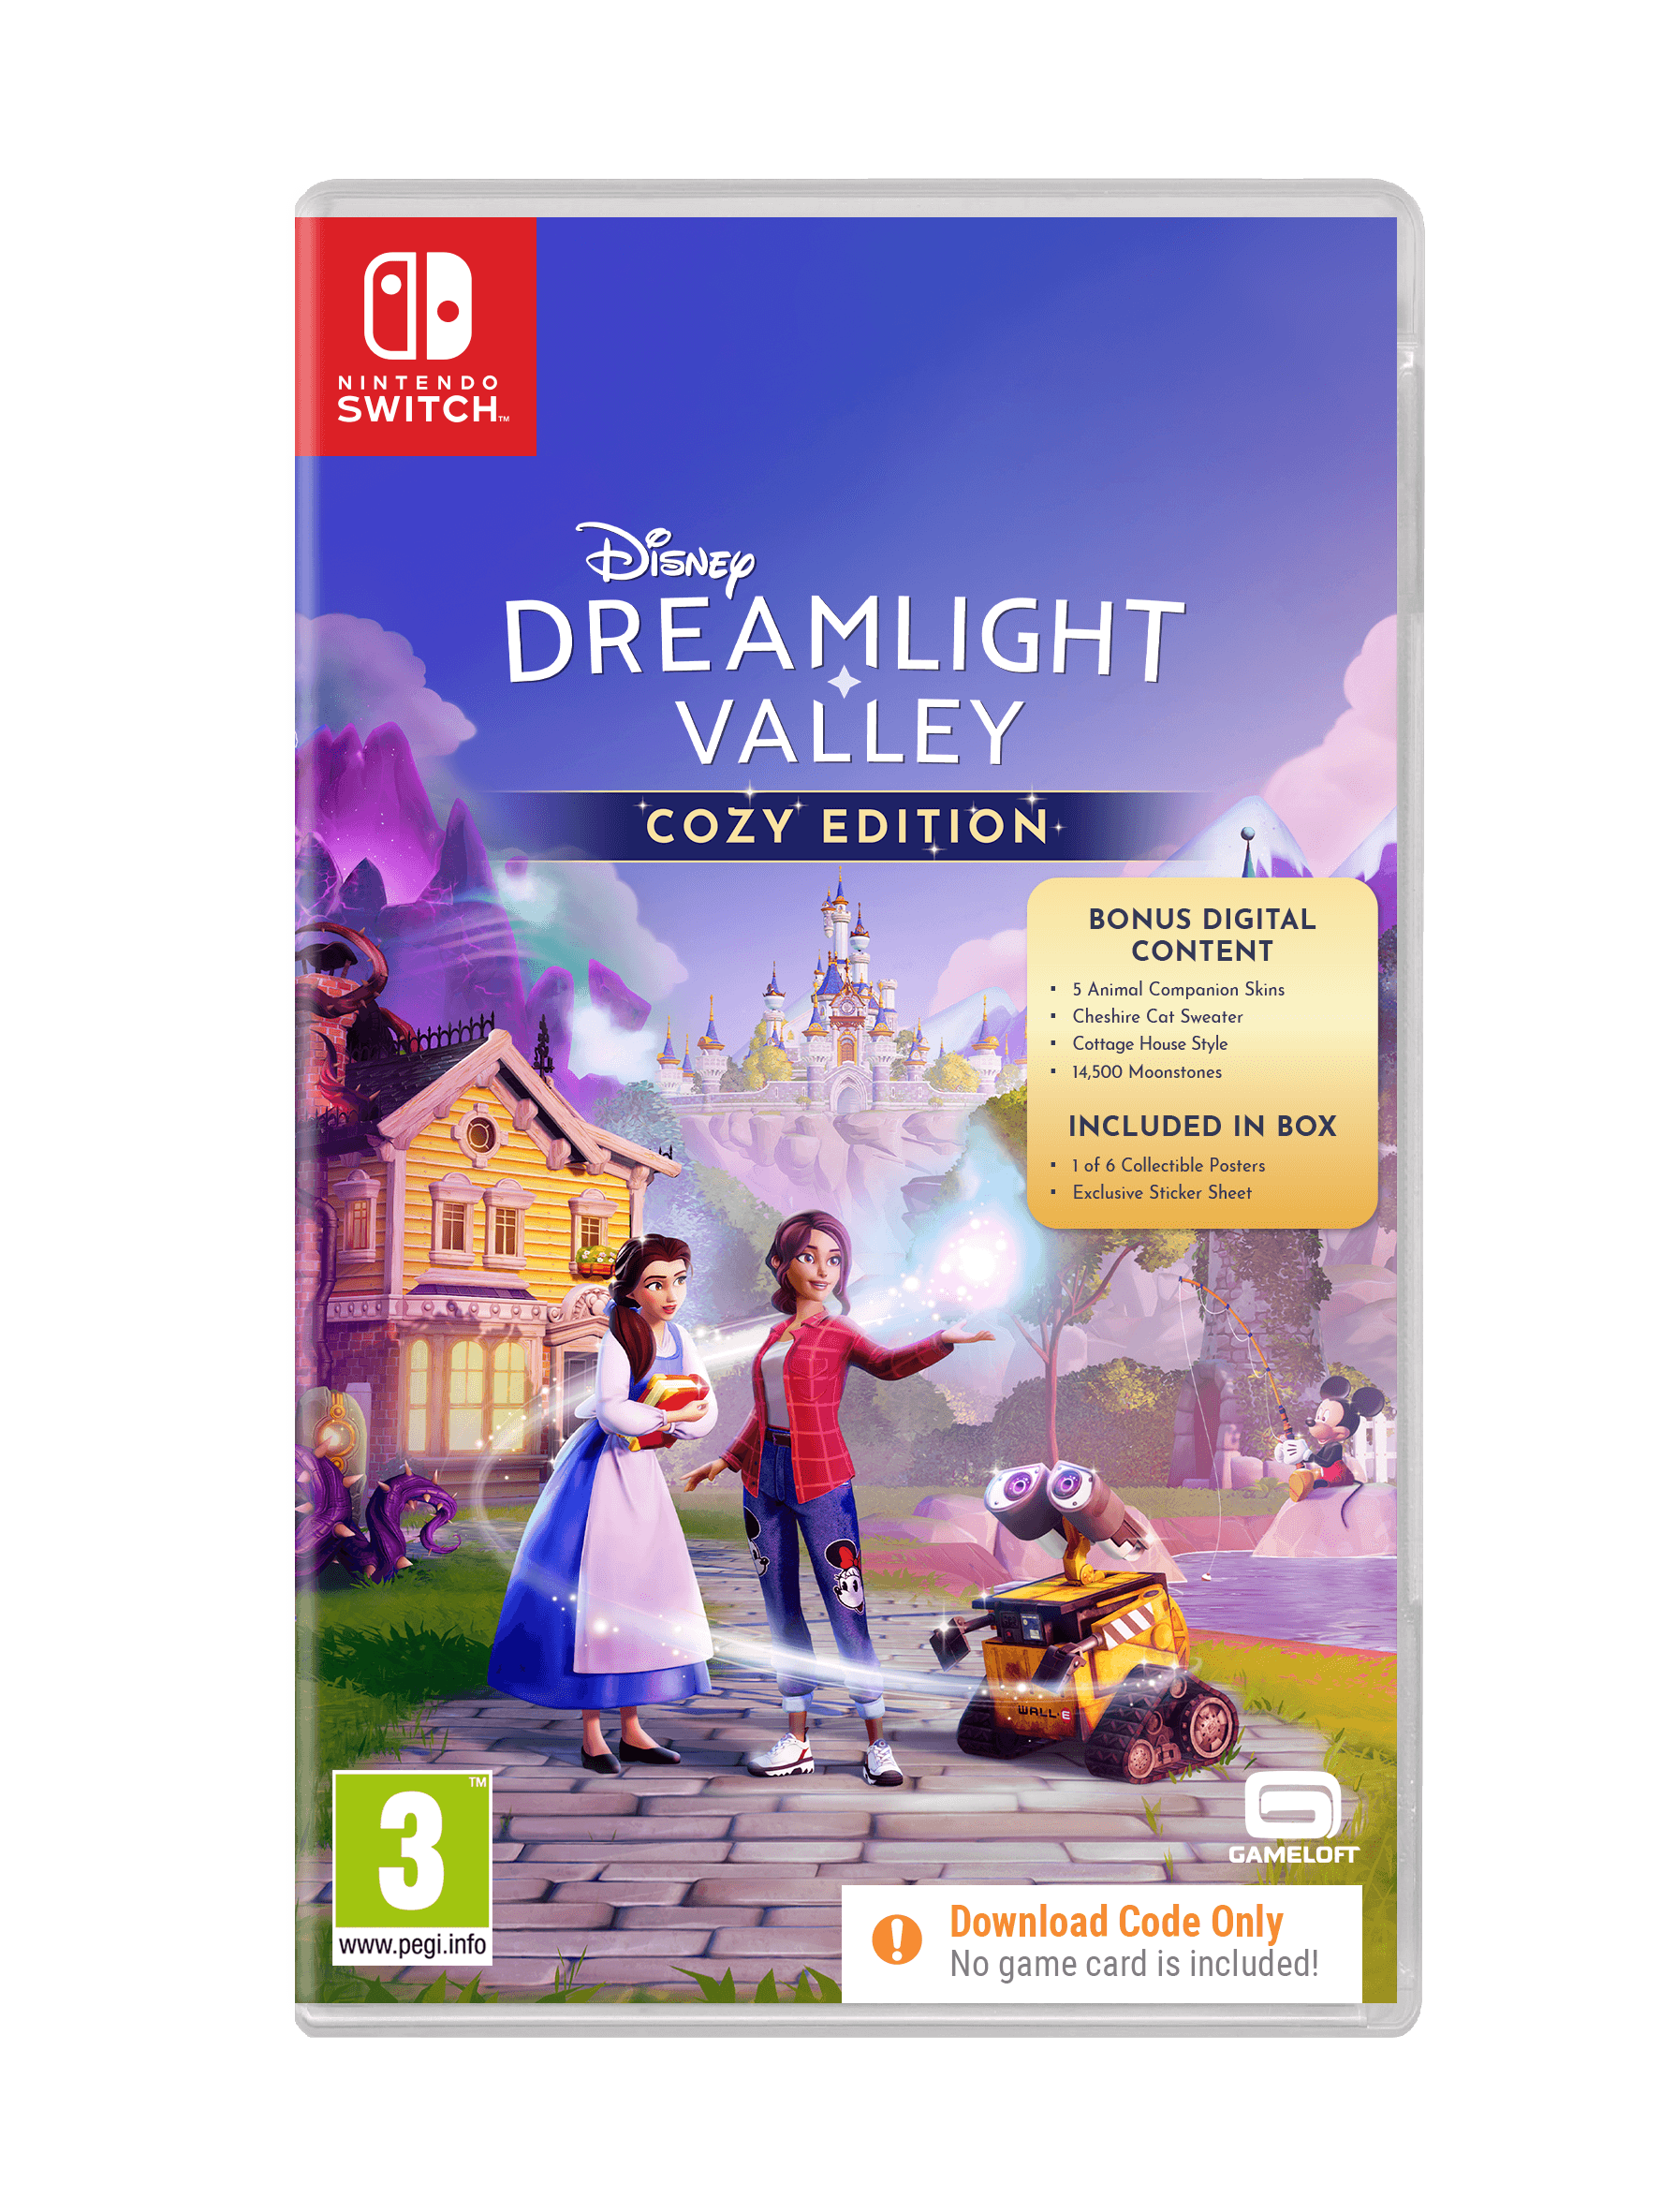 Nintendo Switch - Disney Dreamlight Valley: Cozy Edition - Want a New Gadget